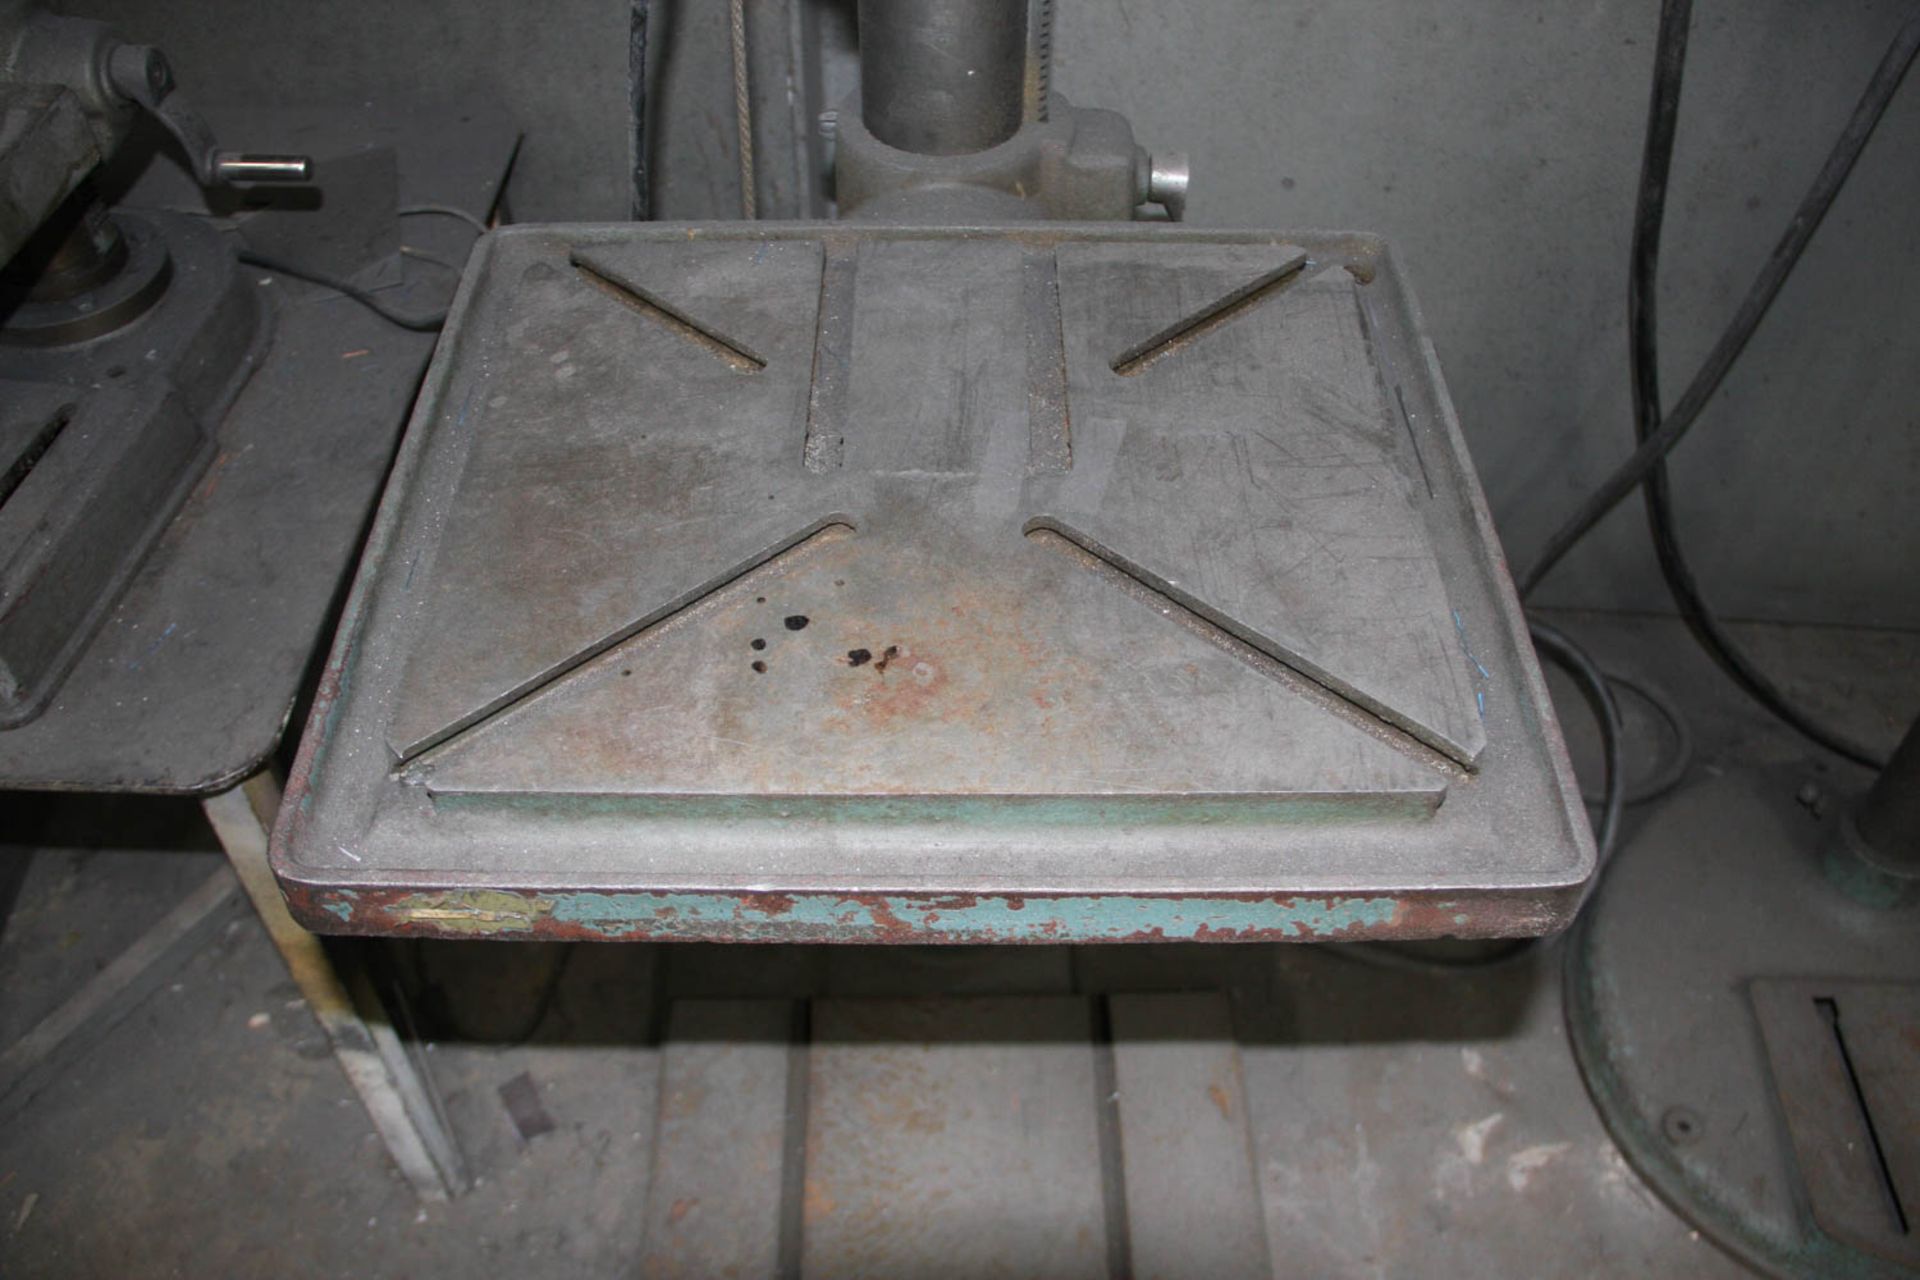 22" ENCO MDL.126-2220 FLOOR TYPE DRILL PRESS, DRILL CHUCK, 180-4200 RPM, 13-1/2" X 16" TABLE, SINGLE - Image 3 of 3